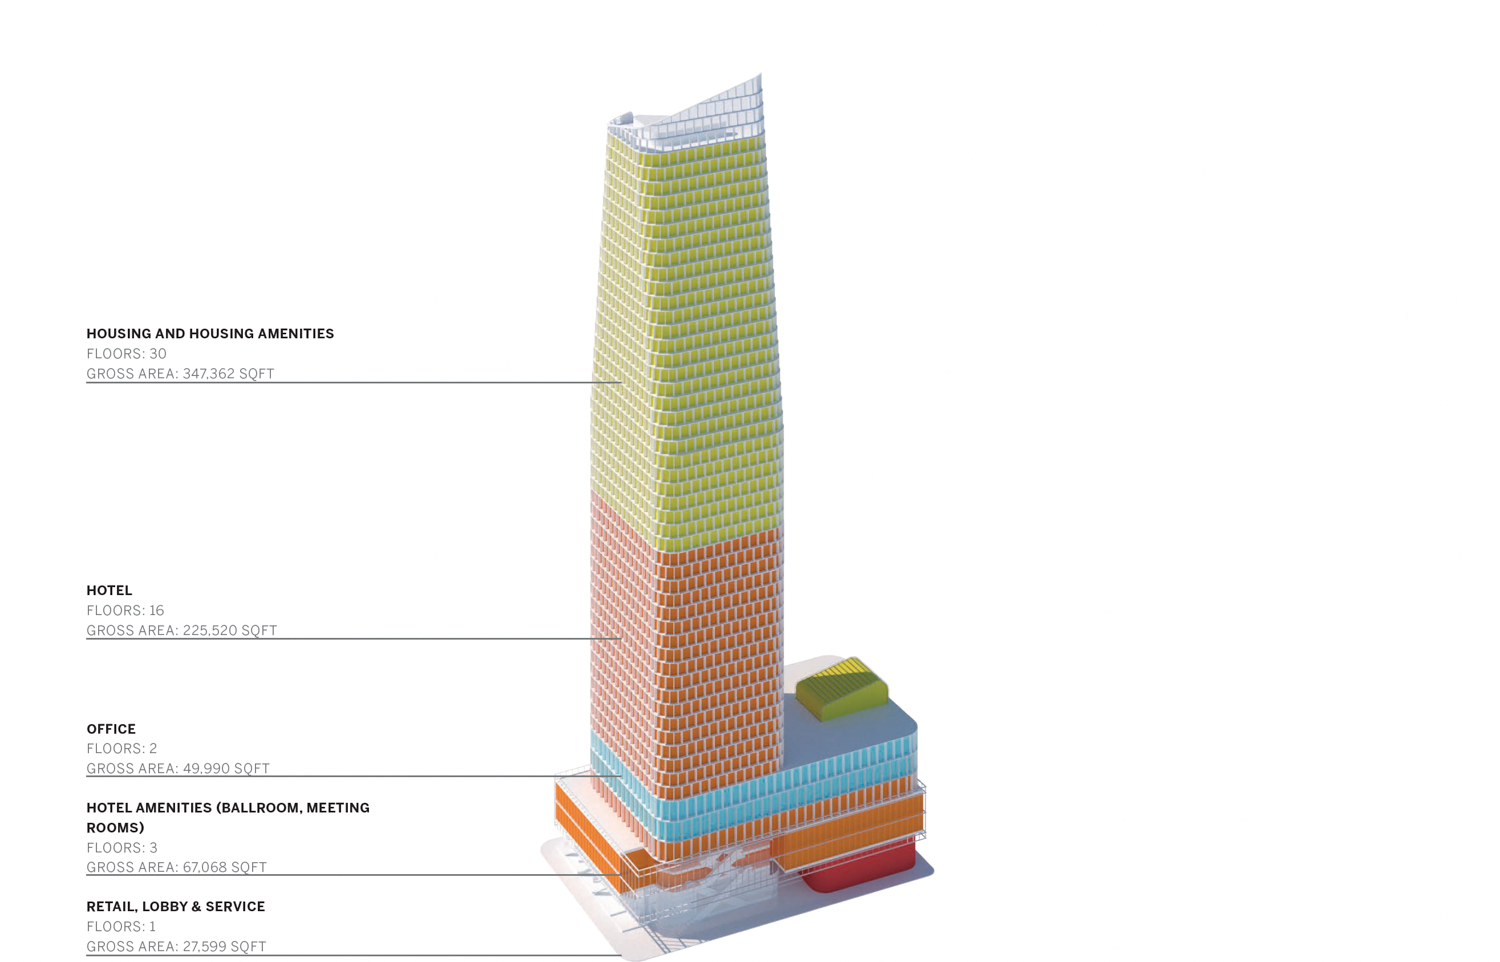 45-53 Third Street massing and floor use diagram, elevation by SOM